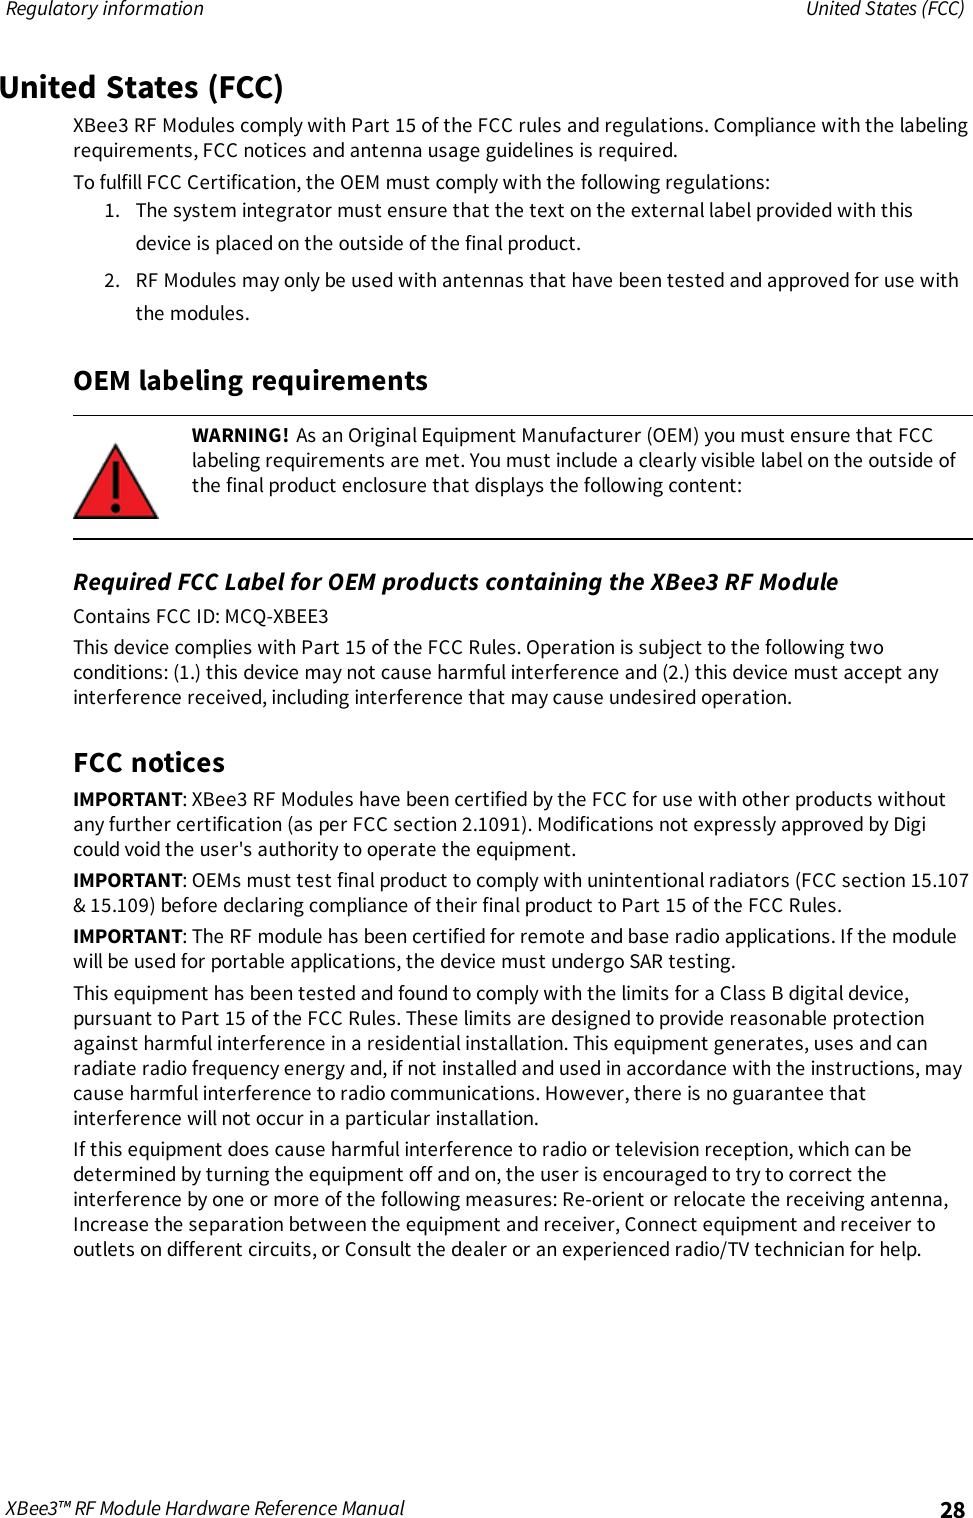 Regulatory information United States (FCC)XBee3™ RF Module Hardware Reference Manual 28United States (FCC)XBee3 RF Modules comply with Part 15 of the FCC rules and regulations. Compliance with the labelingrequirements, FCC notices and antenna usage guidelines is required.To fulfill FCC Certification, the OEM must comply with the following regulations:1. The system integrator must ensure that the text on the external label provided with thisdevice is placed on the outside of the final product.2. RF Modules may only be used with antennas that have been tested and approved for use withthe modules.OEM labeling requirementsWARNING! As an Original Equipment Manufacturer (OEM) you must ensure that FCClabeling requirements are met. You must include a clearly visible label on the outside ofthe final product enclosure that displays the following content:Required FCC Label for OEM products containing the XBee3 RF ModuleContains FCC ID: MCQ-XBEE3This device complies with Part 15 of the FCC Rules. Operation is subject to the following twoconditions: (1.) this device may not cause harmful interference and (2.) this device must accept anyinterference received, including interference that may cause undesired operation.FCC noticesIMPORTANT: XBee3 RF Modules have been certified by the FCC for use with other products withoutany further certification (as per FCC section 2.1091). Modifications not expressly approved by Digicould void the user&apos;s authority to operate the equipment.IMPORTANT: OEMs must test final product to comply with unintentional radiators (FCC section 15.107&amp; 15.109) before declaring compliance of their final product to Part 15 of the FCC Rules.IMPORTANT: The RF module has been certified for remote and base radio applications. If the modulewill be used for portable applications, the device must undergo SAR testing.This equipment has been tested and found to comply with the limits for a Class B digital device,pursuant to Part 15 of the FCC Rules. These limits are designed to provide reasonable protectionagainst harmful interference in a residential installation. This equipment generates, uses and canradiate radio frequency energy and, if not installed and used in accordance with the instructions, maycause harmful interference to radio communications. However, there is no guarantee thatinterference will not occur in a particular installation.If this equipment does cause harmful interference to radio or television reception, which can bedetermined by turning the equipment off and on, the user is encouraged to try to correct theinterference by one or more of the following measures: Re-orient or relocate the receiving antenna,Increase the separation between the equipment and receiver, Connect equipment and receiver tooutlets on different circuits, or Consult the dealer or an experienced radio/TV technician for help.